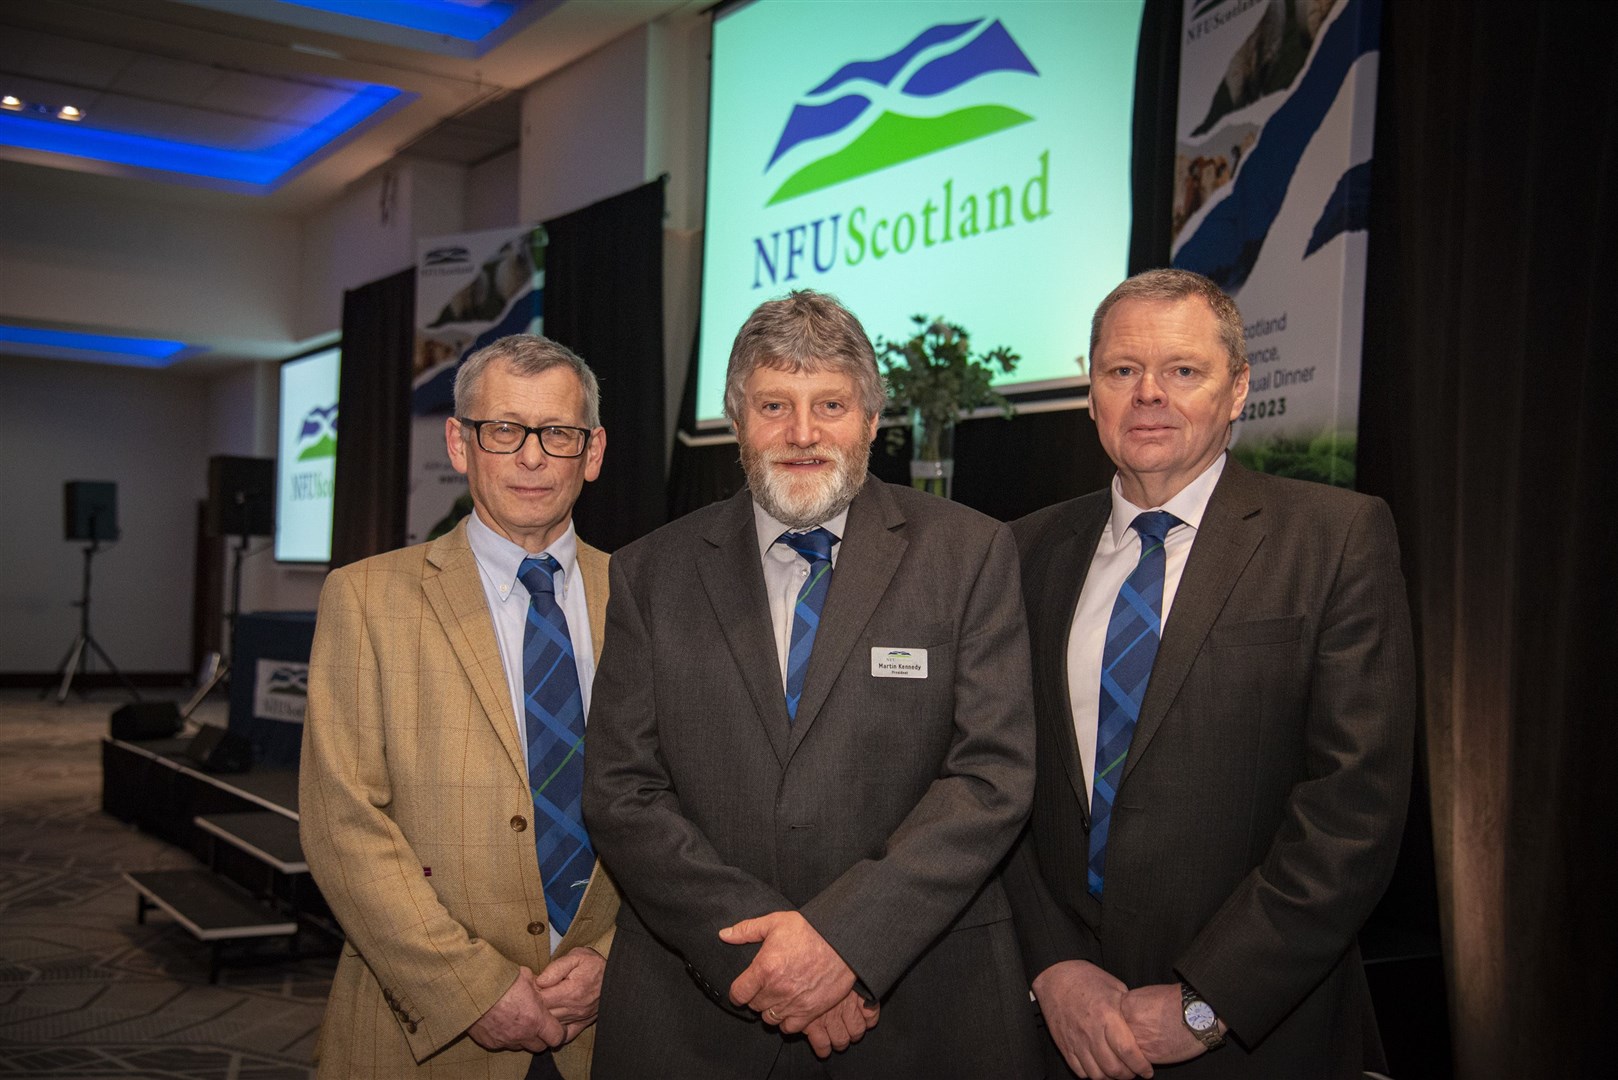 NFU Scotland's top team for 2023 will be president Martin Kennedy (centre), returning vice-president Andrew Connon (right) and newly elected vice-president ,Alasdair Macnab. Picture: Paul Watt